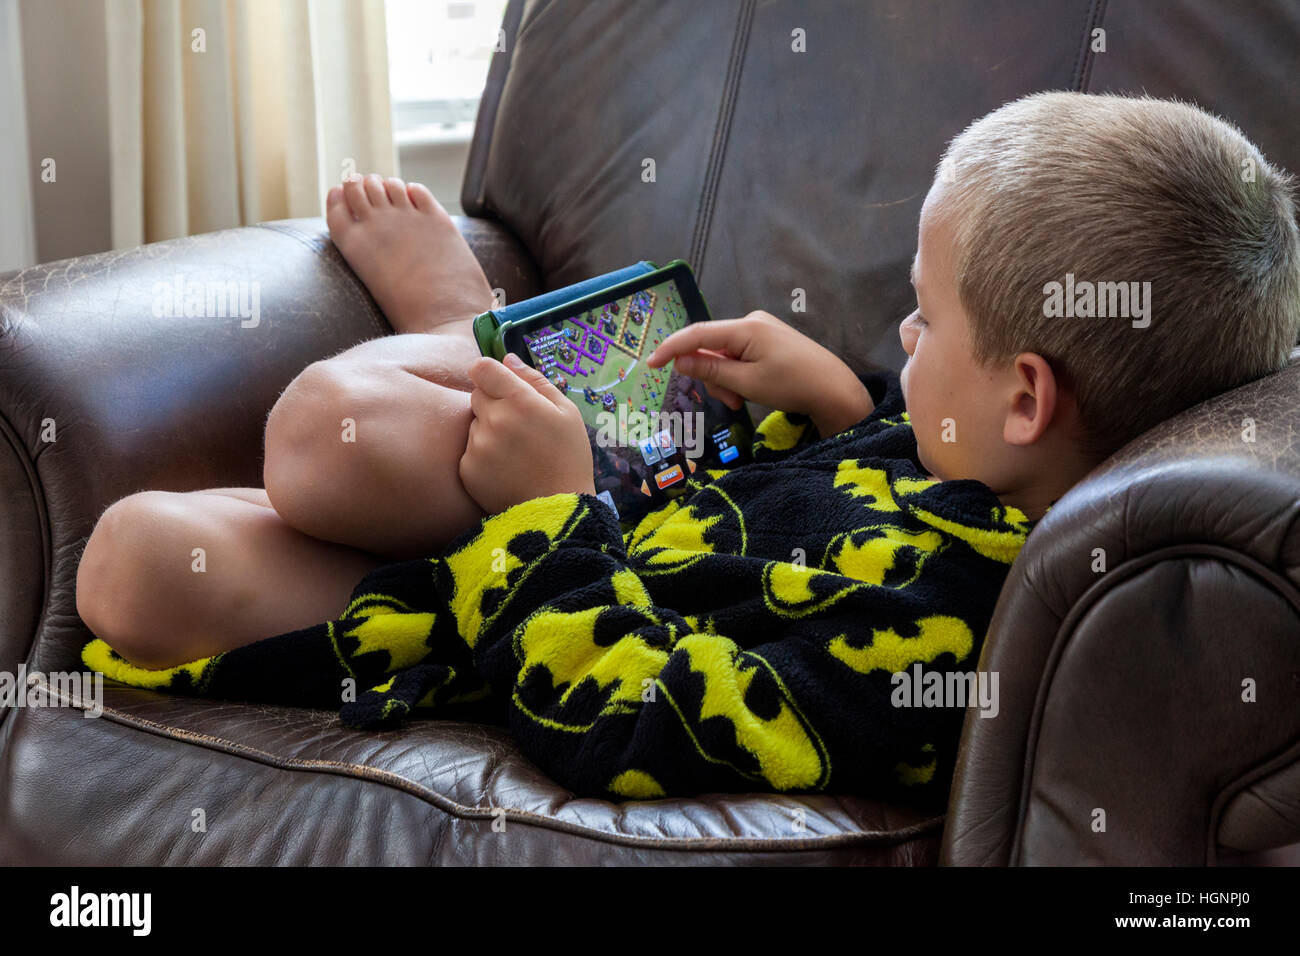 Seven-year-old Boy Playing a game on iPad. Stock Photo